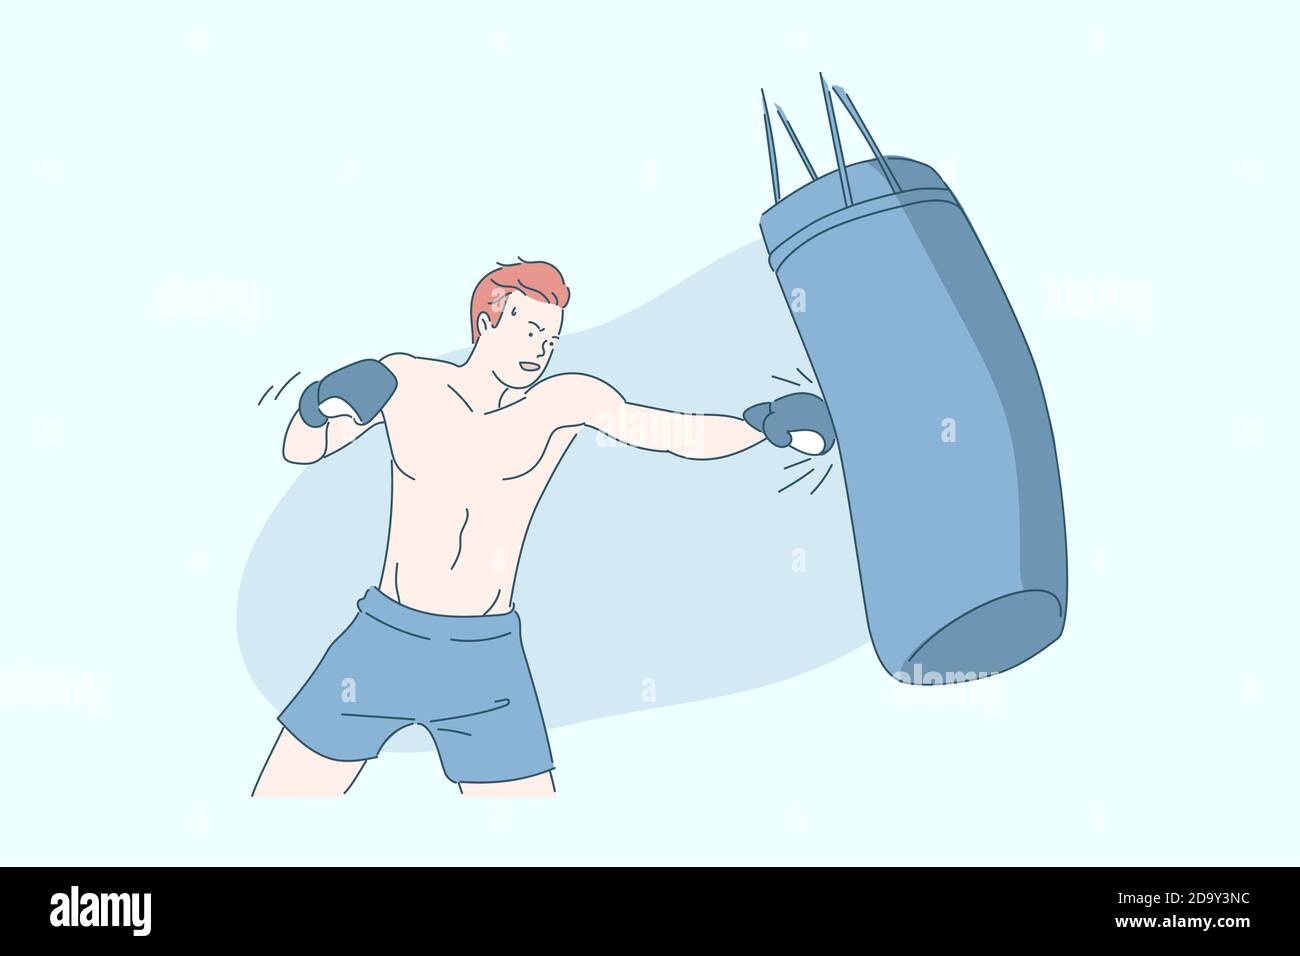 Boxing, sports training, sportsman with boxing bag concept Stock Vector